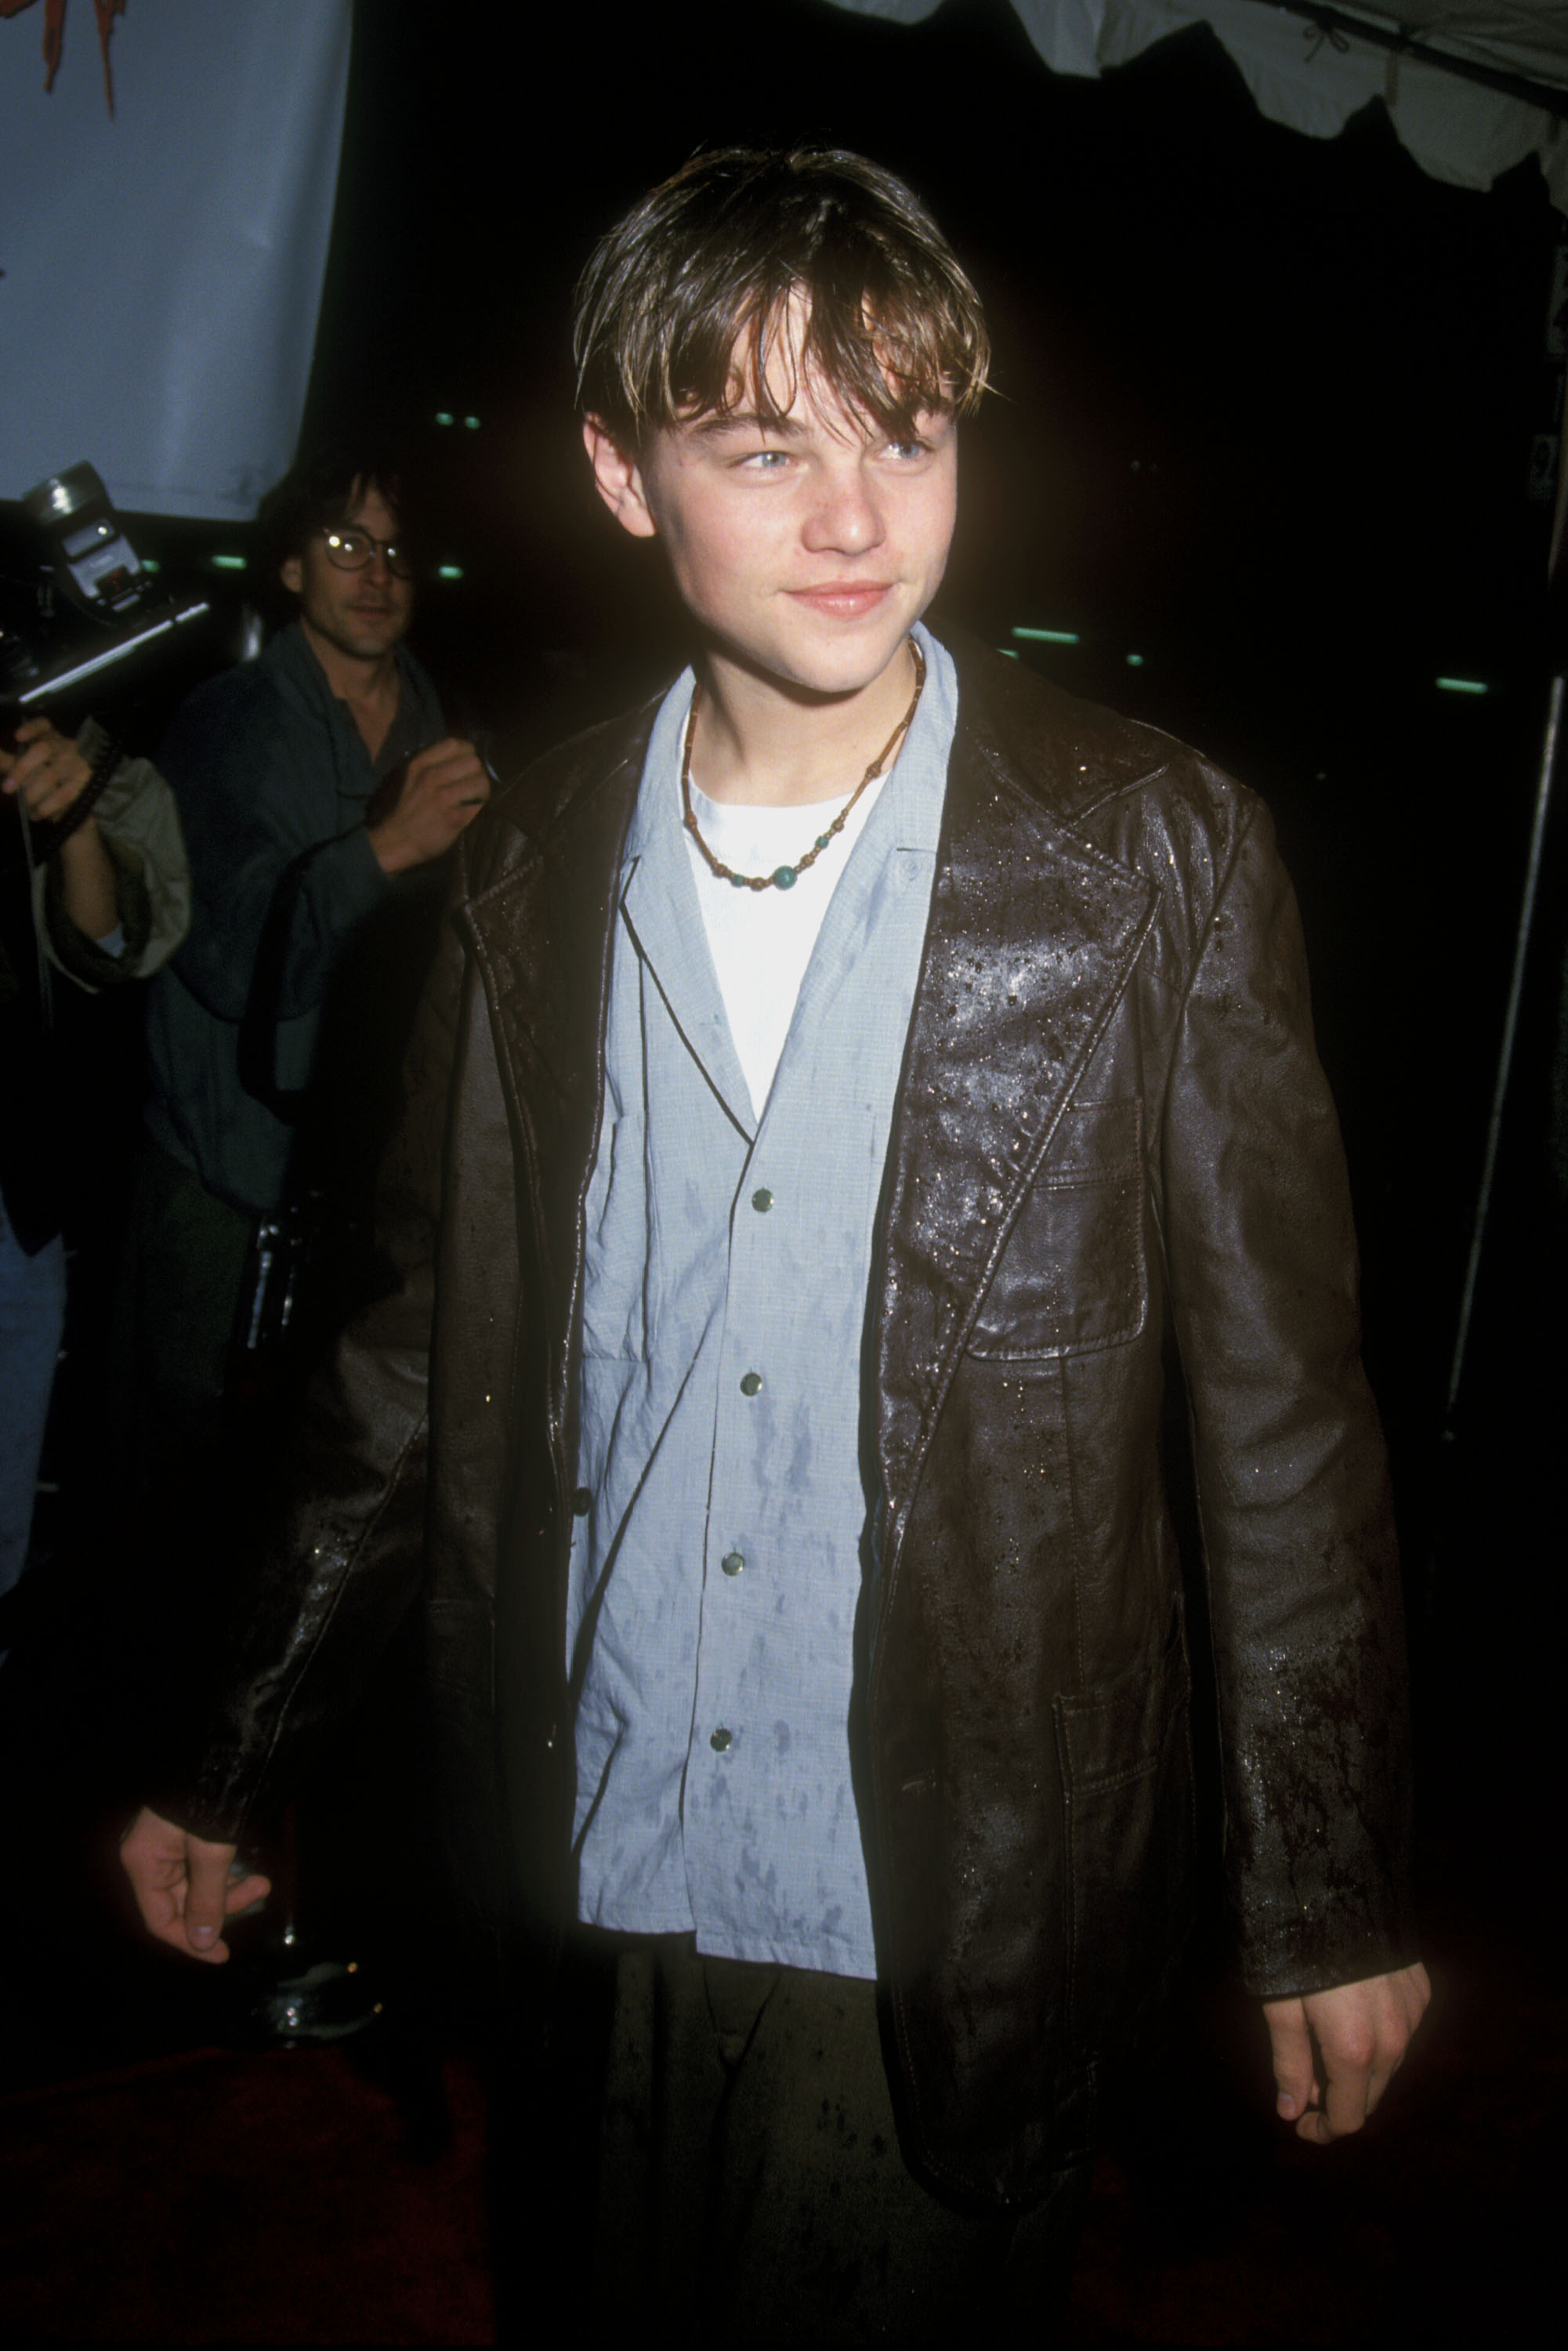 Leonardo DiCaprio at the premiere of Benny & Joon in Los Angeles on March 25, 1993.